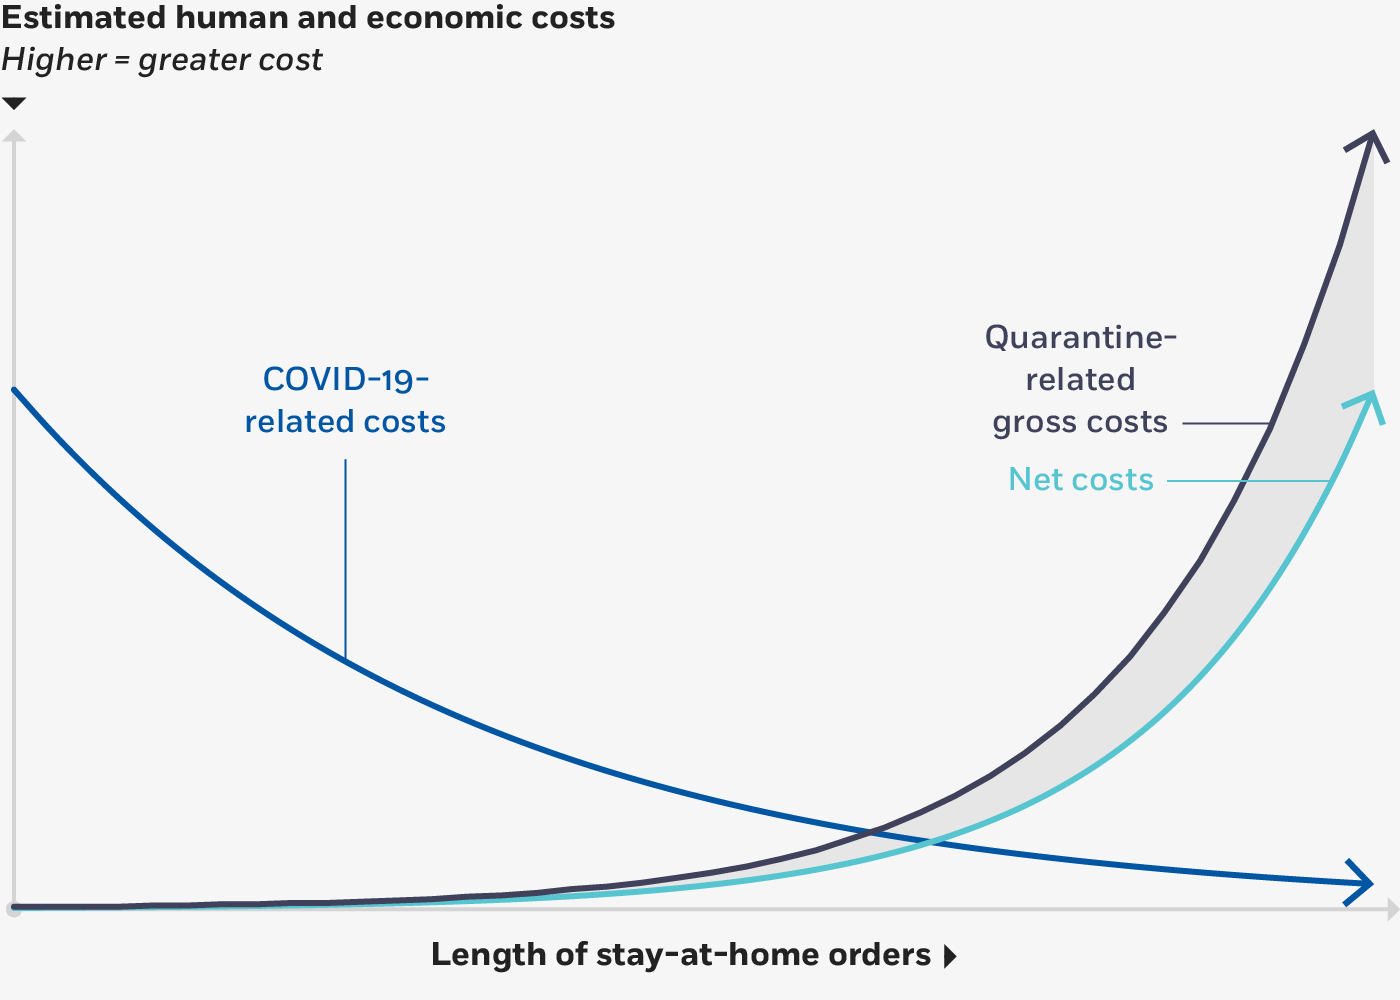 Another line diagram like the others, showing rising estimated human and economic costs on the y-axis and increasing length of stay-at-home orders on the x-axis. This one replicates just the trend curve for total estimated costs from the second diagram above, falling until the halfway point and then rising. It also includes confidence bands with a fairly consistent width across the full span, but slightly wider at the beginning and end of the curve.